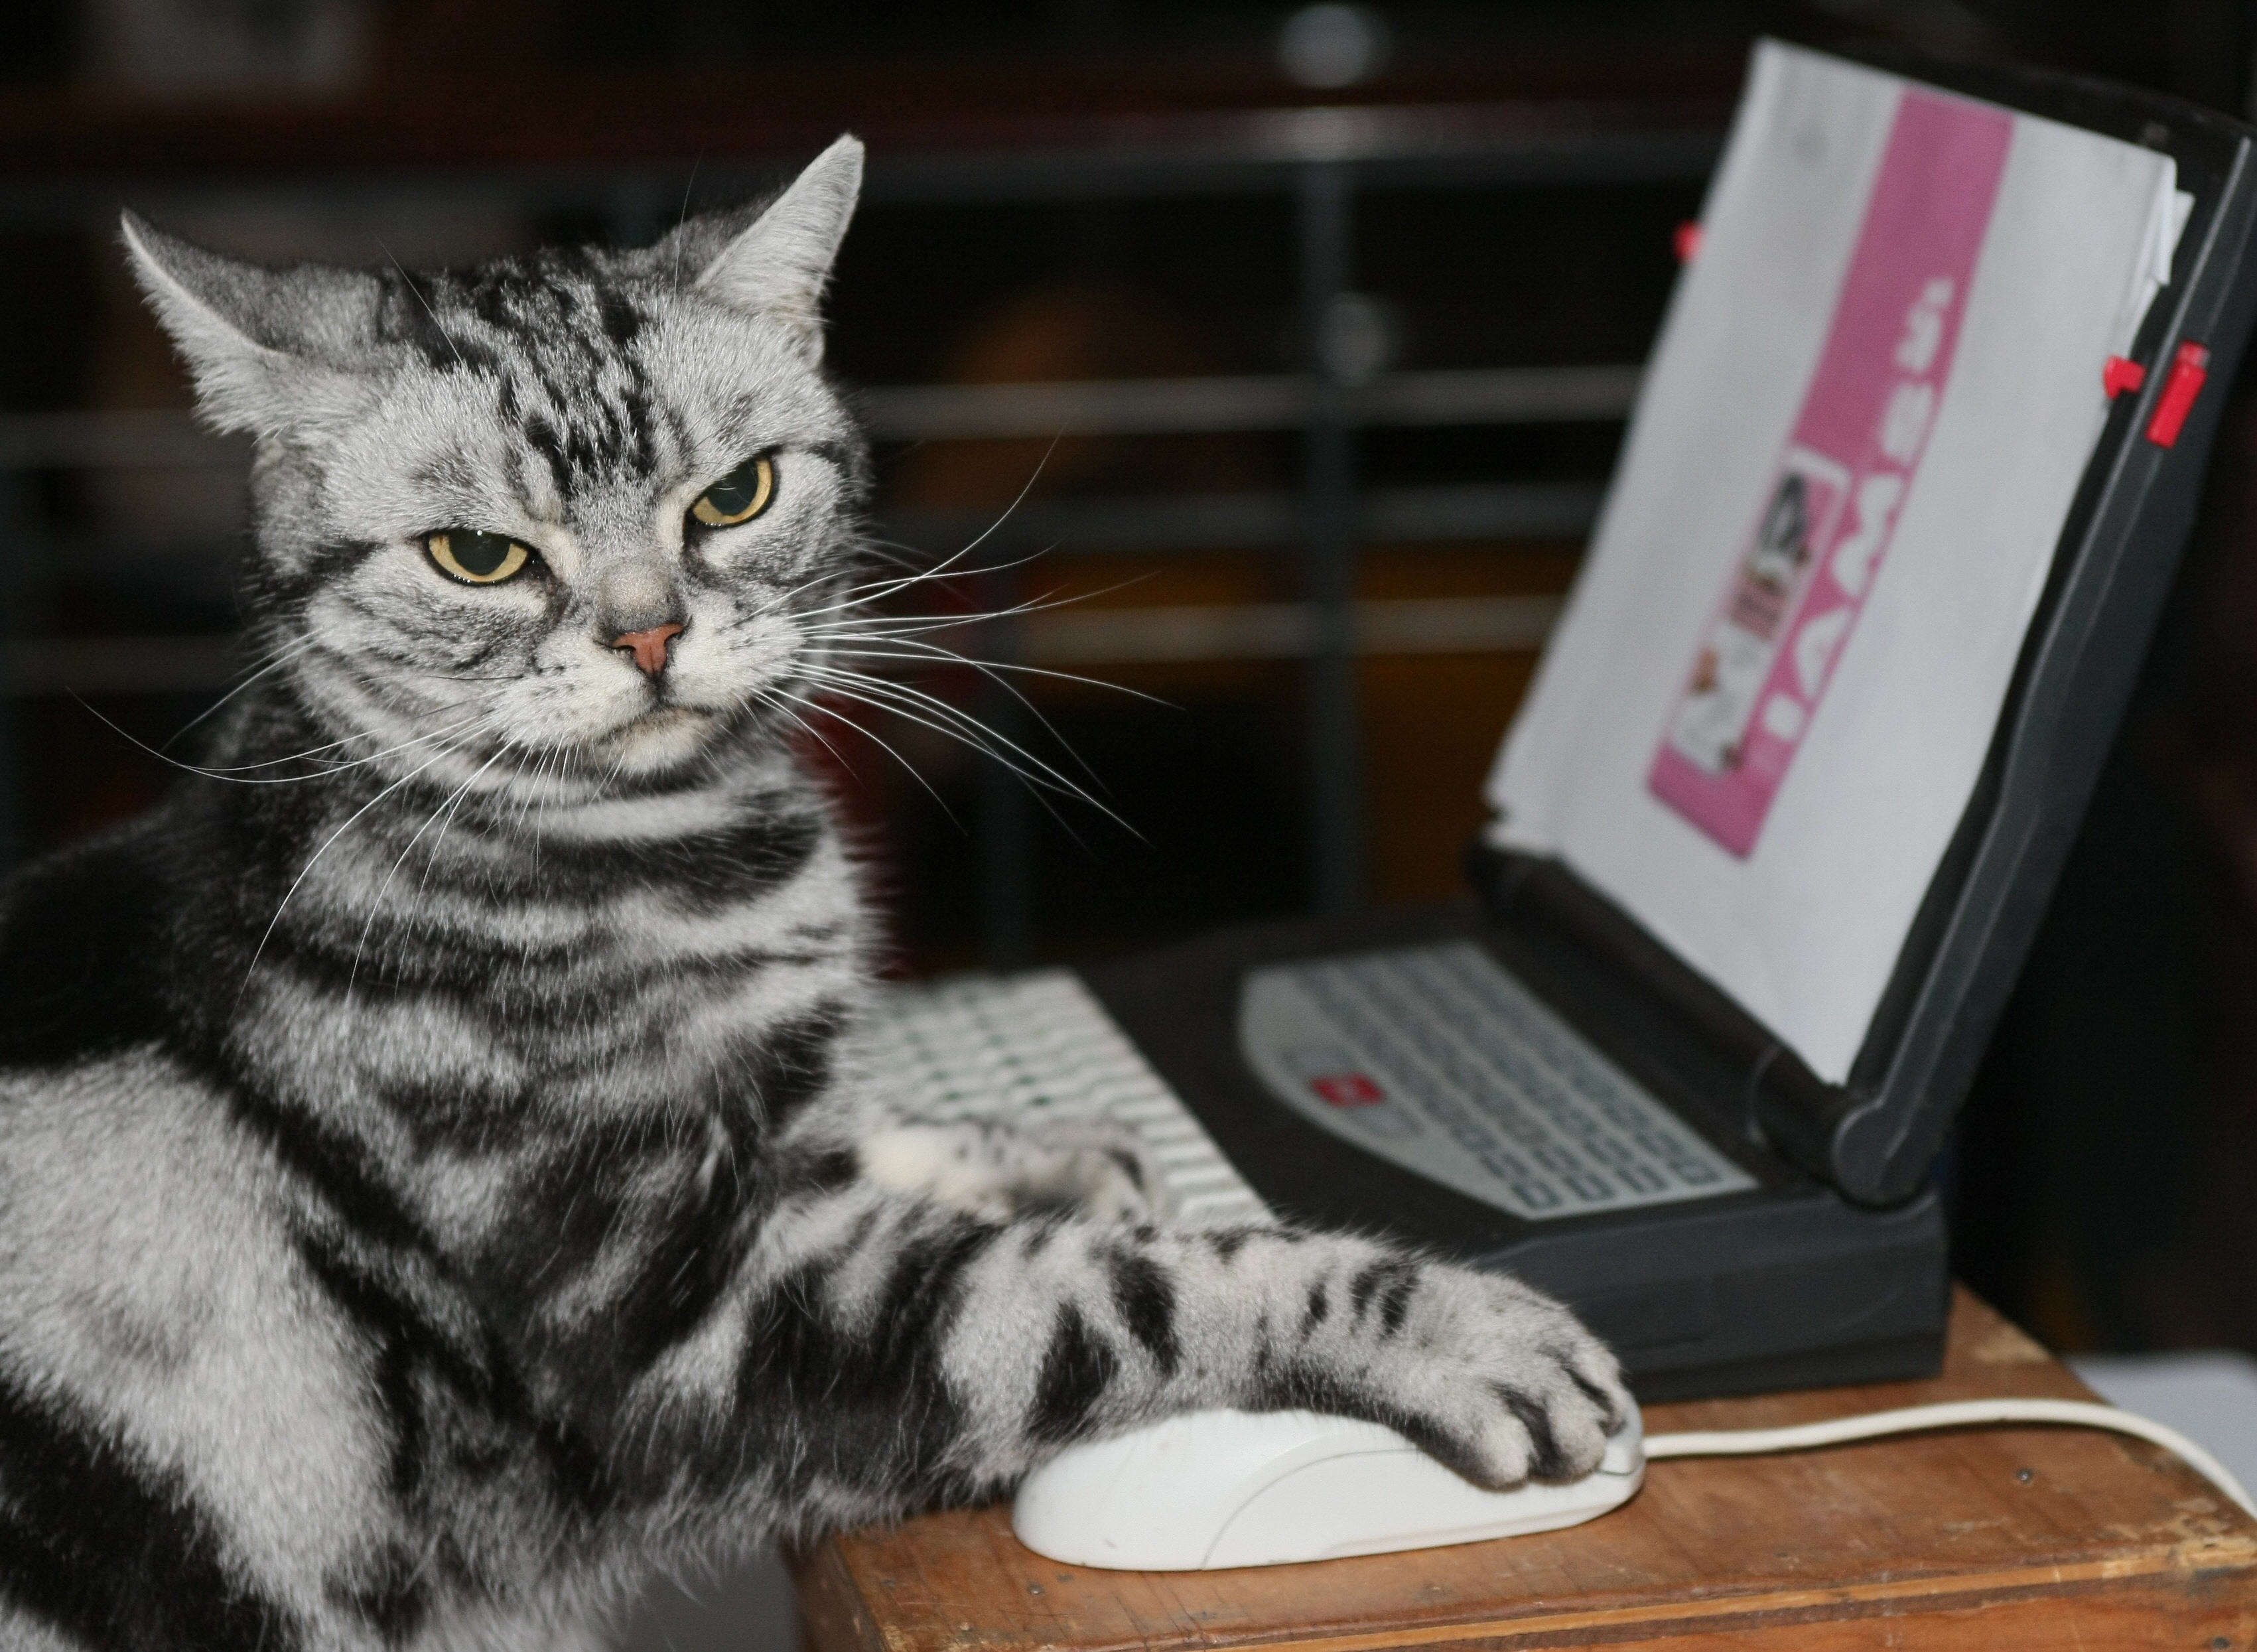 Maverick, an American Short Hair, keeps his claw on the mouse as he uses a computer at a press preview for the Cat Fanciers' Association show 10 October 2007 at Madison Square Garden in New York. The Cat Championship competition runs 13-14 October at the Garden. AFP PHOTO/DON EMMERT (Photo credit should read DON EMMERT/AFP/Getty Images)